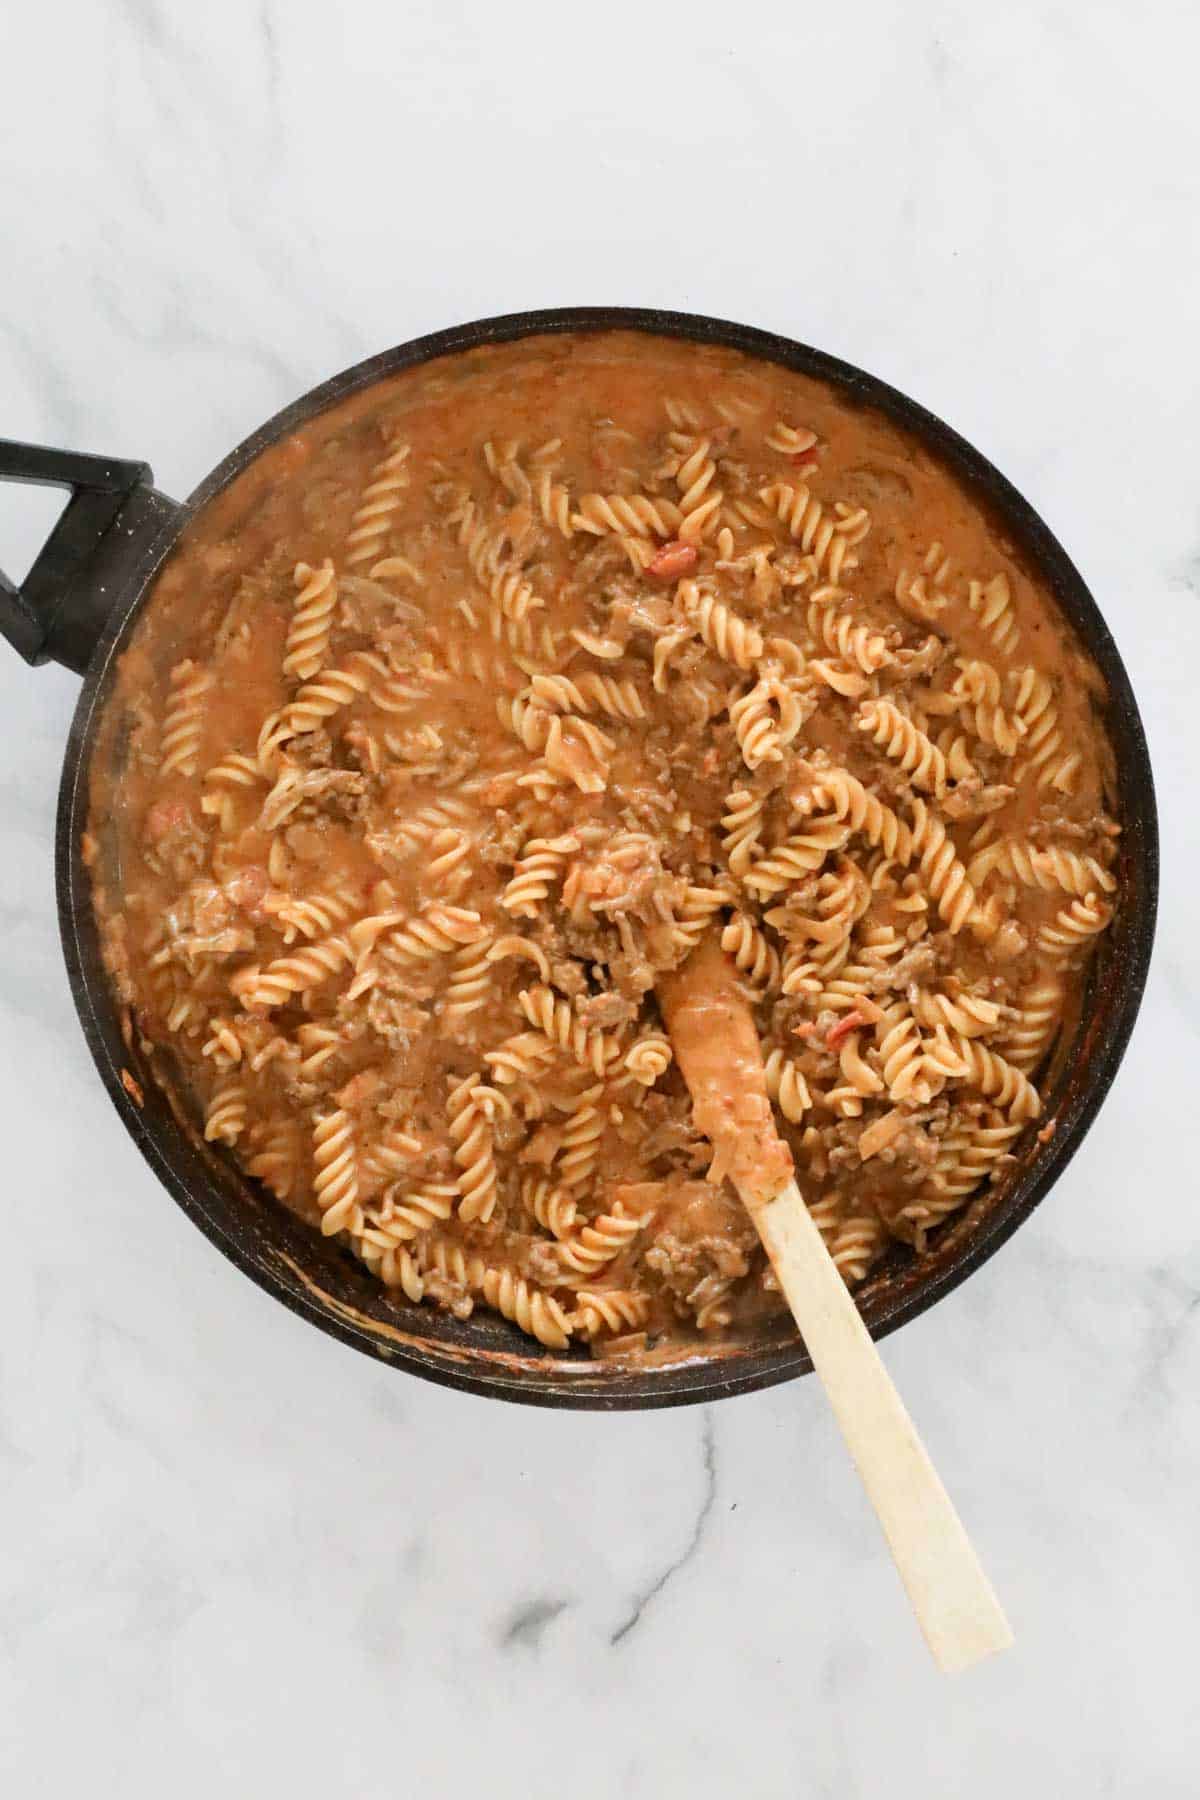 The creamy mixed beef and pasta in the pan with a wooden spoon.